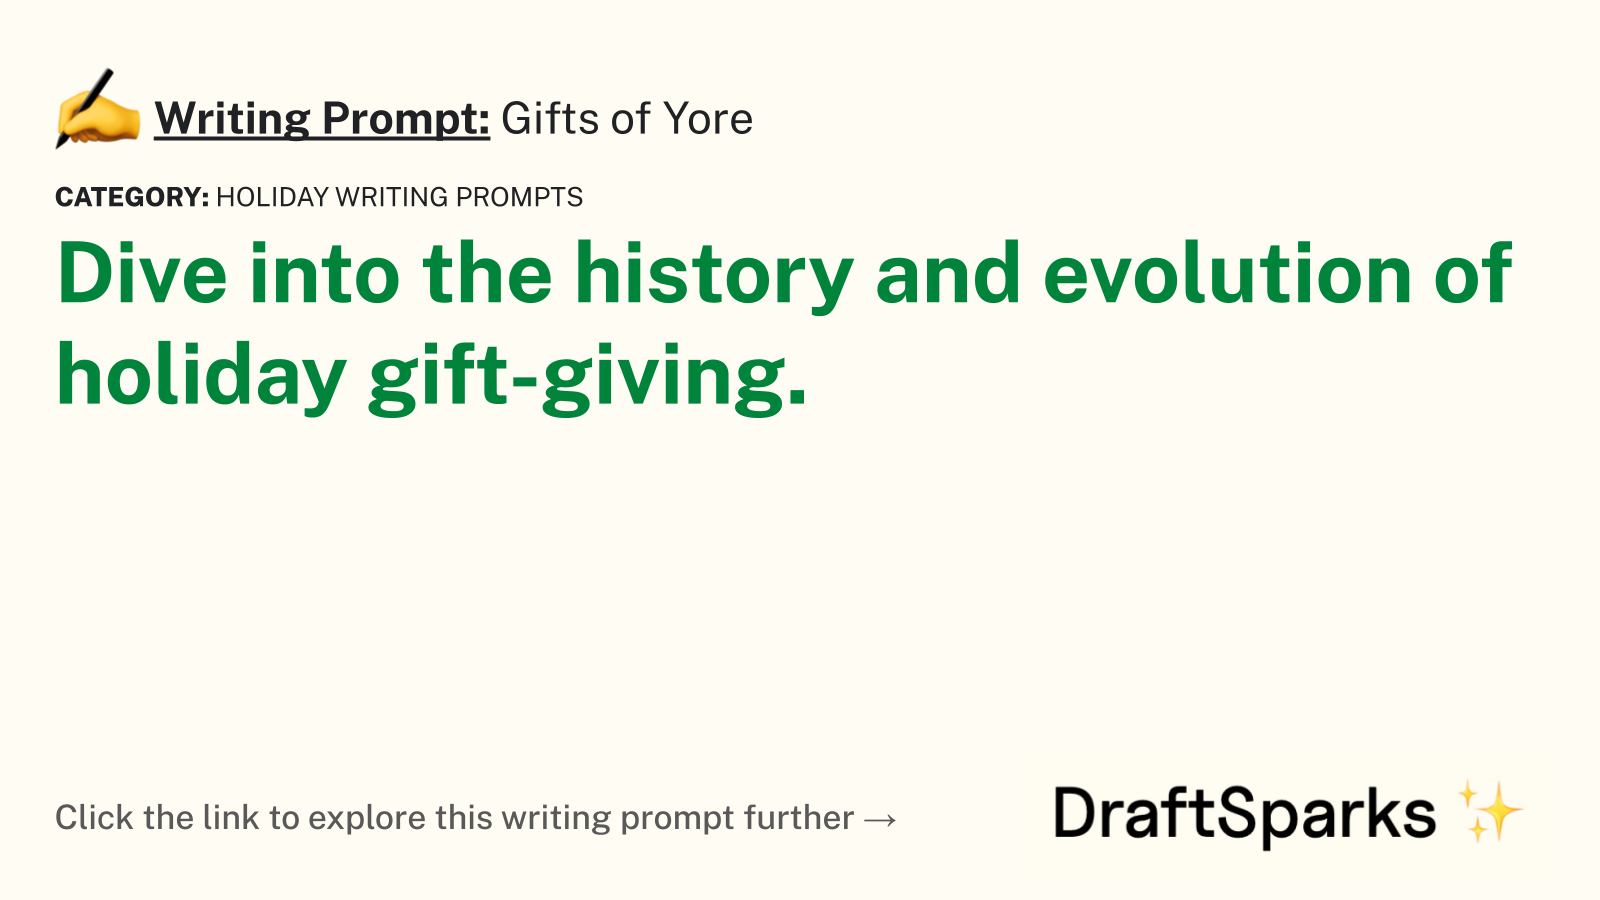 Gifts of Yore